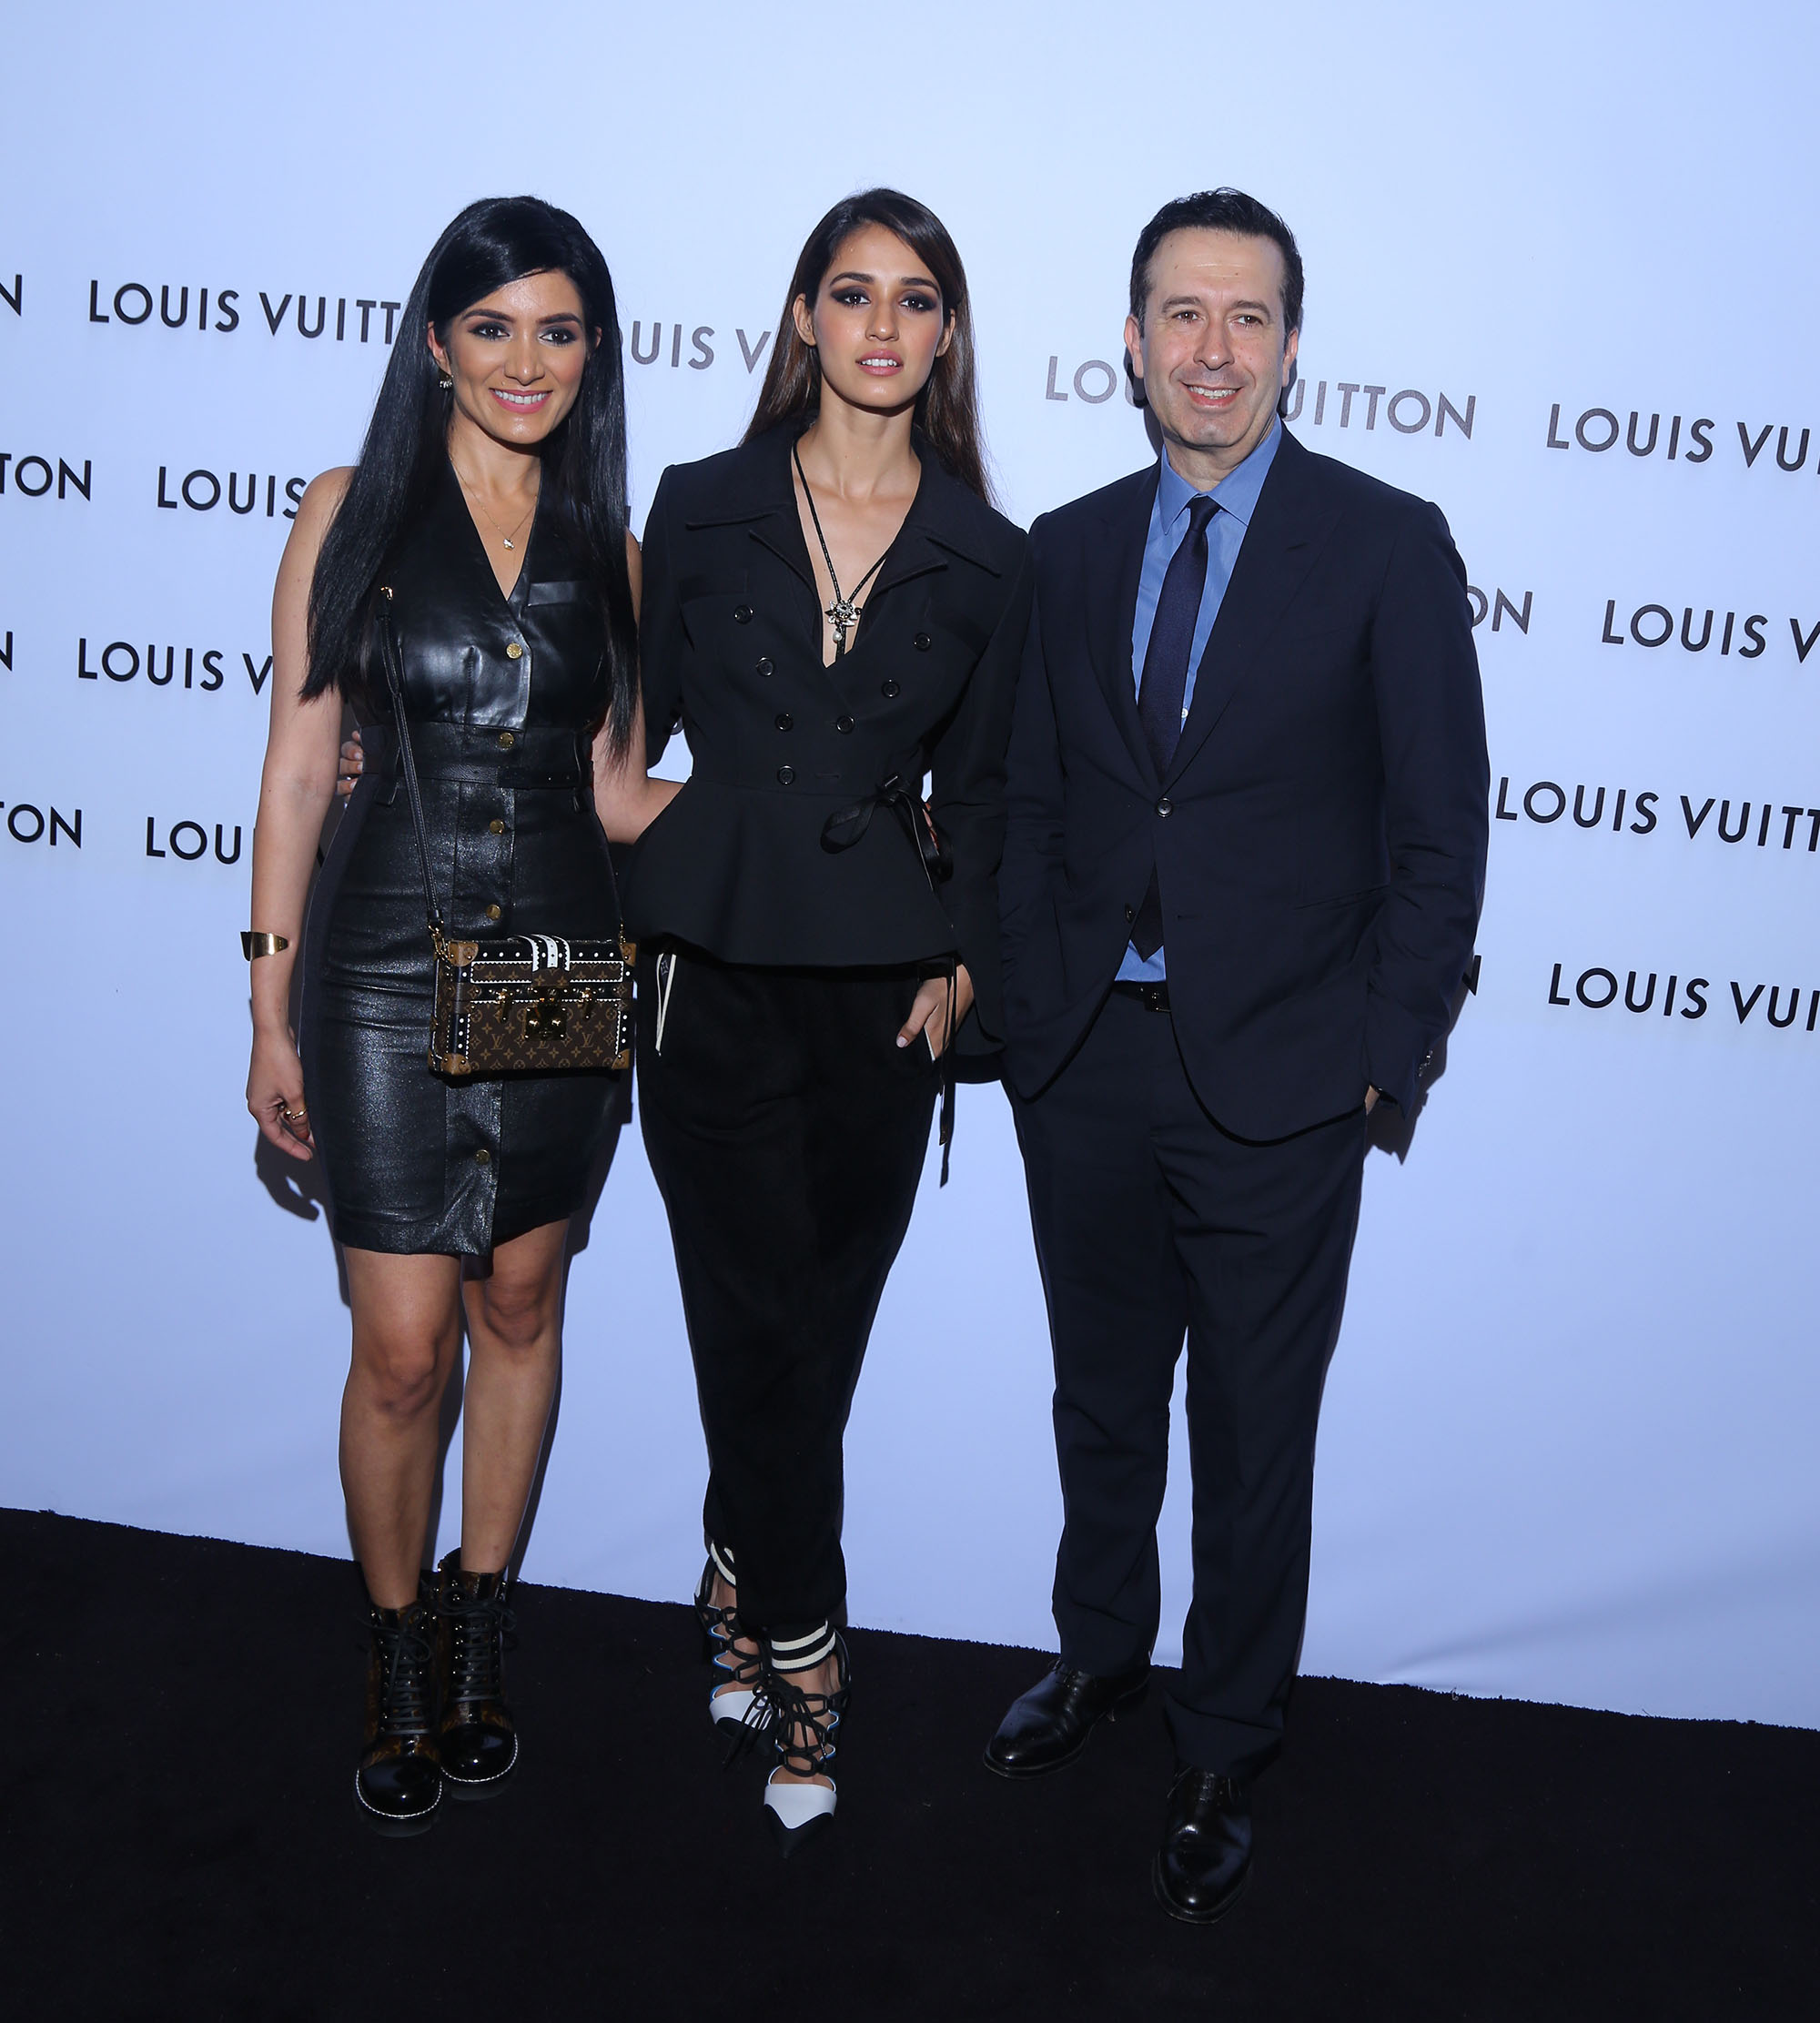 Magnanimous Group - Louis Vuitton celebrated it's 15th year in India. The  expansion of its newly renovated store in New Delhi at DLF Emporio was  attended by prominent guests who previewed @LouisVuitton's